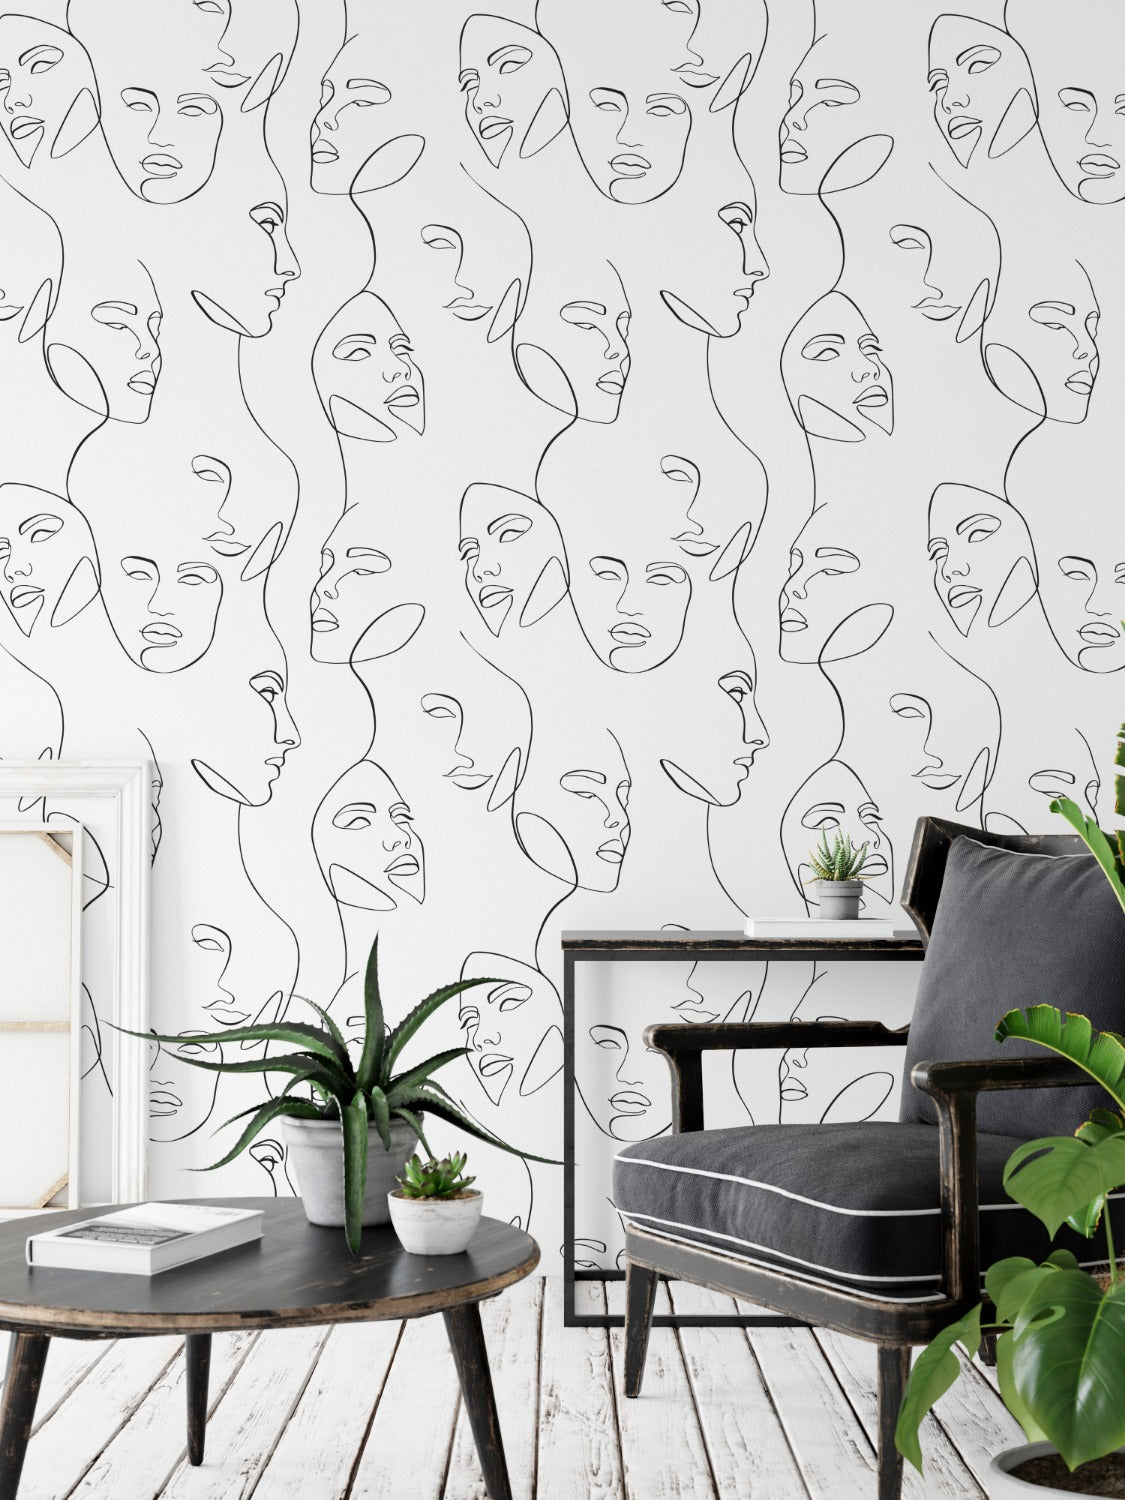 A contemporary room with a wall adorned by the Abstract and Minimal Wallpaper - Line Art III, which displays an array of interconnected black line art faces, offering a bold yet simplistic design element to the space.